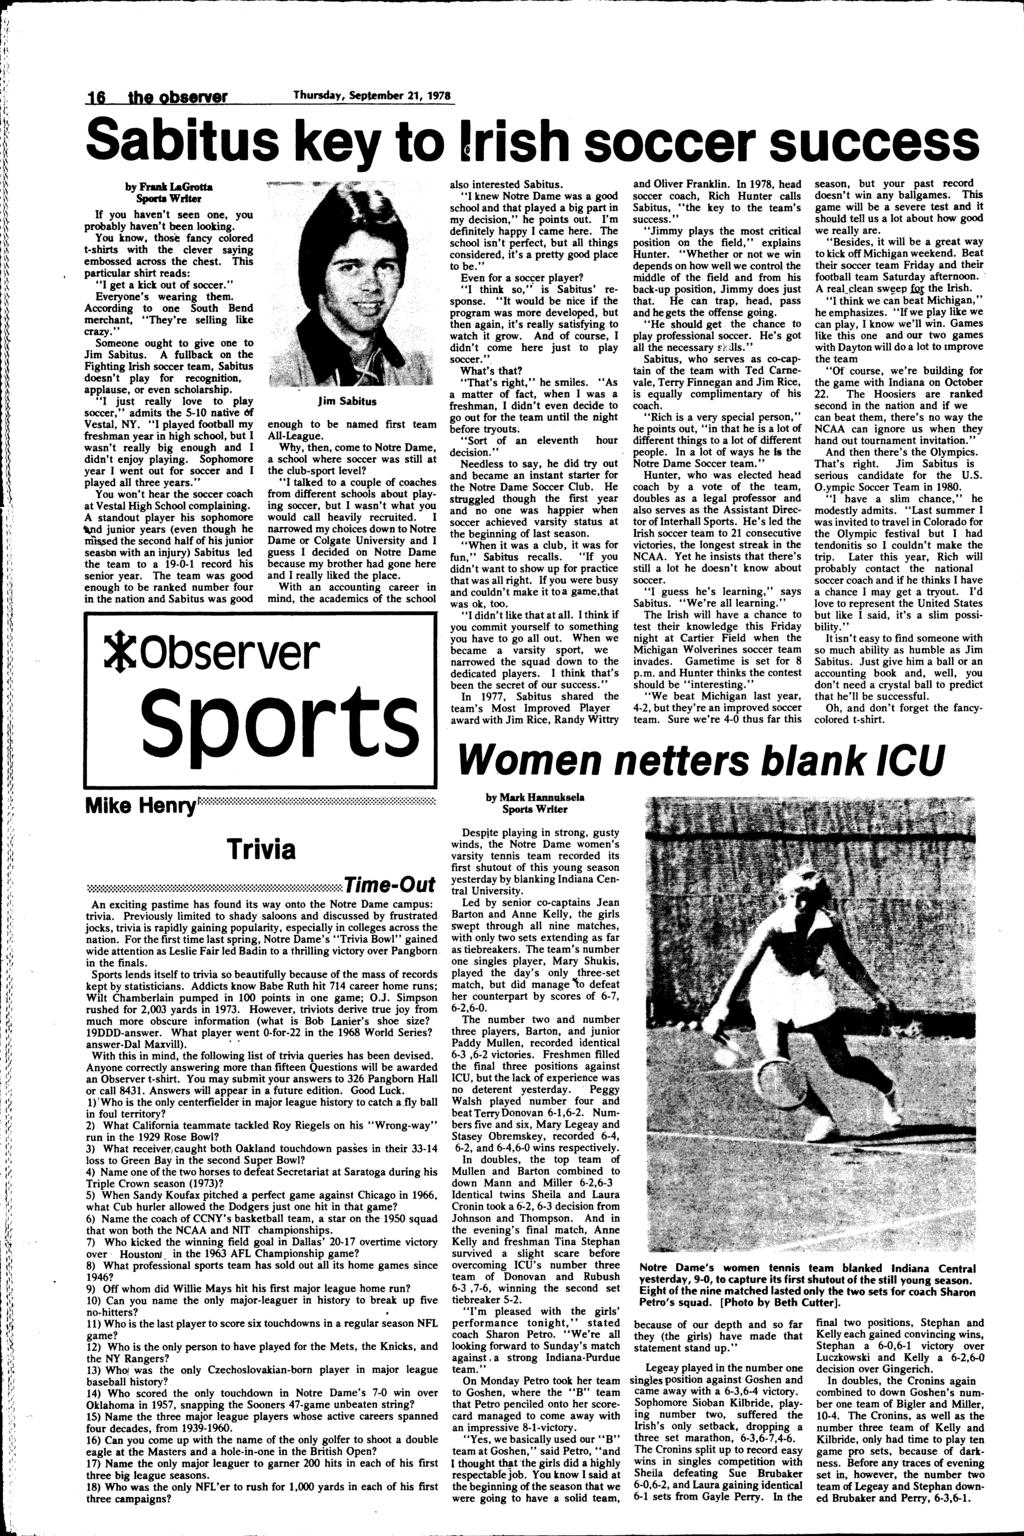 18 he observer Thursday, Sepember 21, 1978 Sabius key o rish soccer success by Frank LaGroa Spora Wrier f you haven seen one, you probably haven been looking.